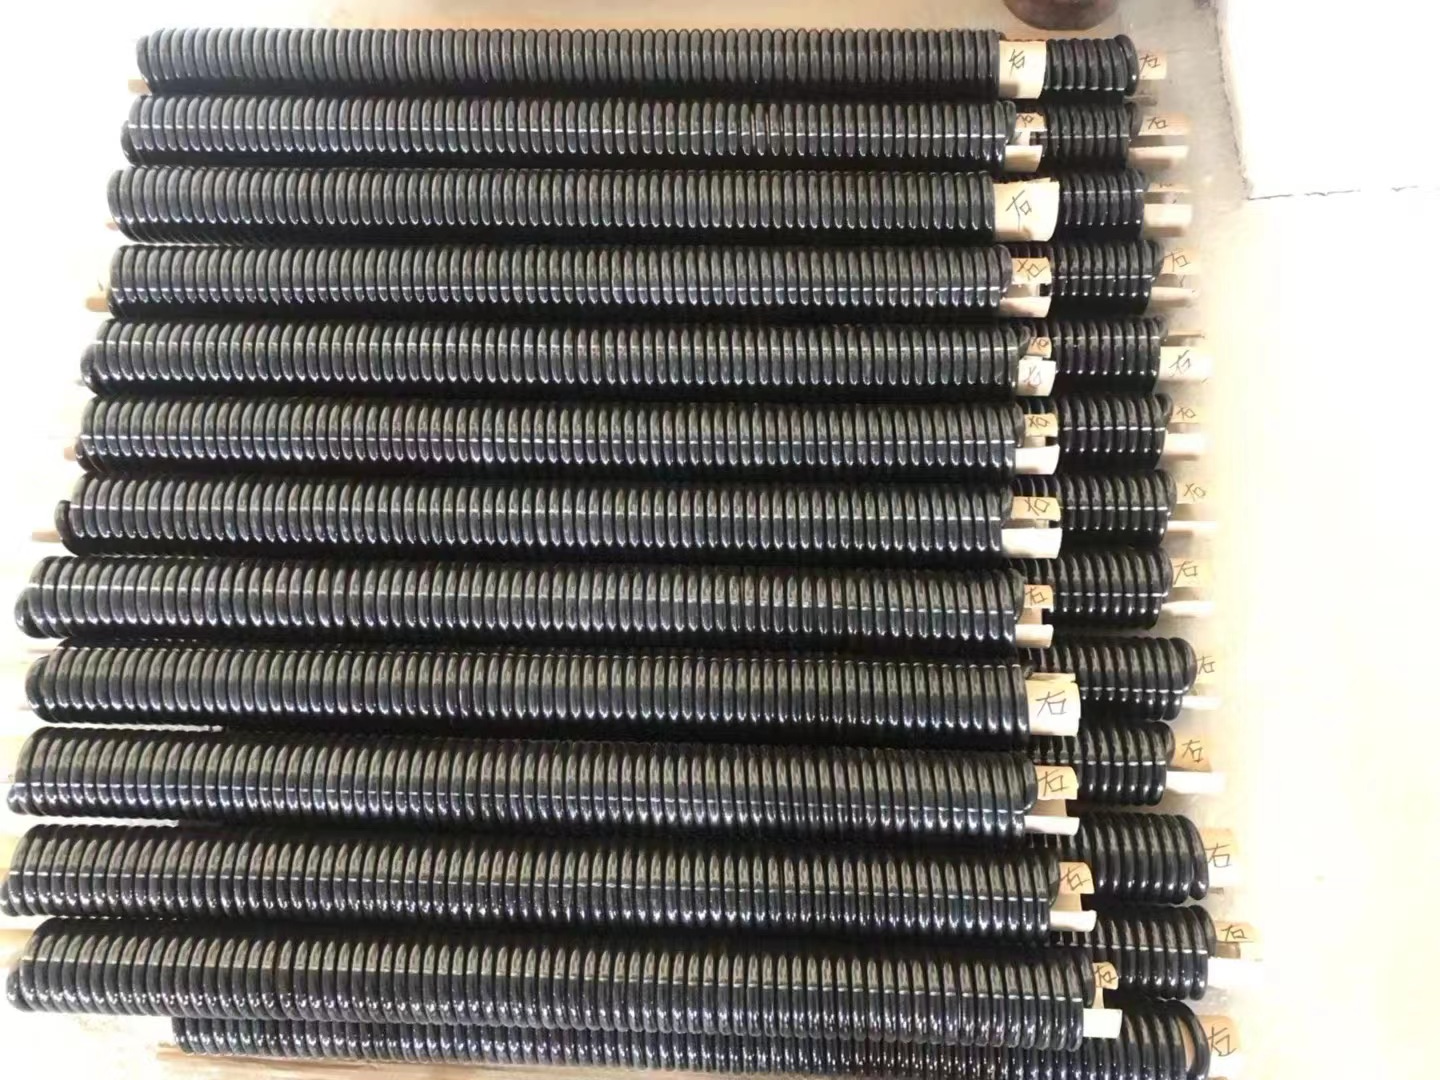 Soot blower 4-core elastic cable PUR material is used for soot blowers